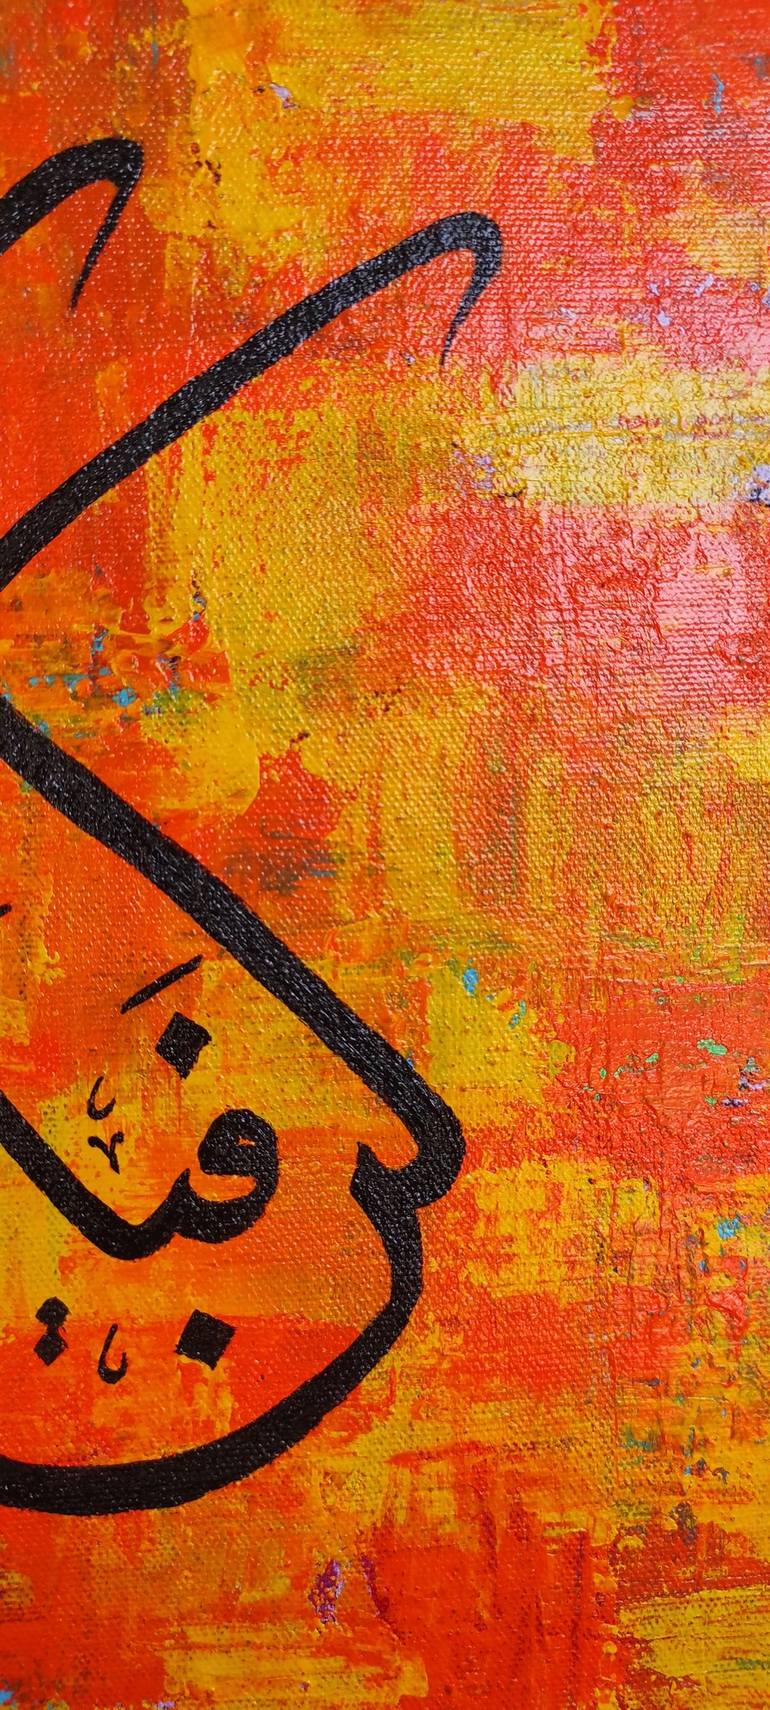 Original Abstract Calligraphy Painting by Zarmeen Lodhi